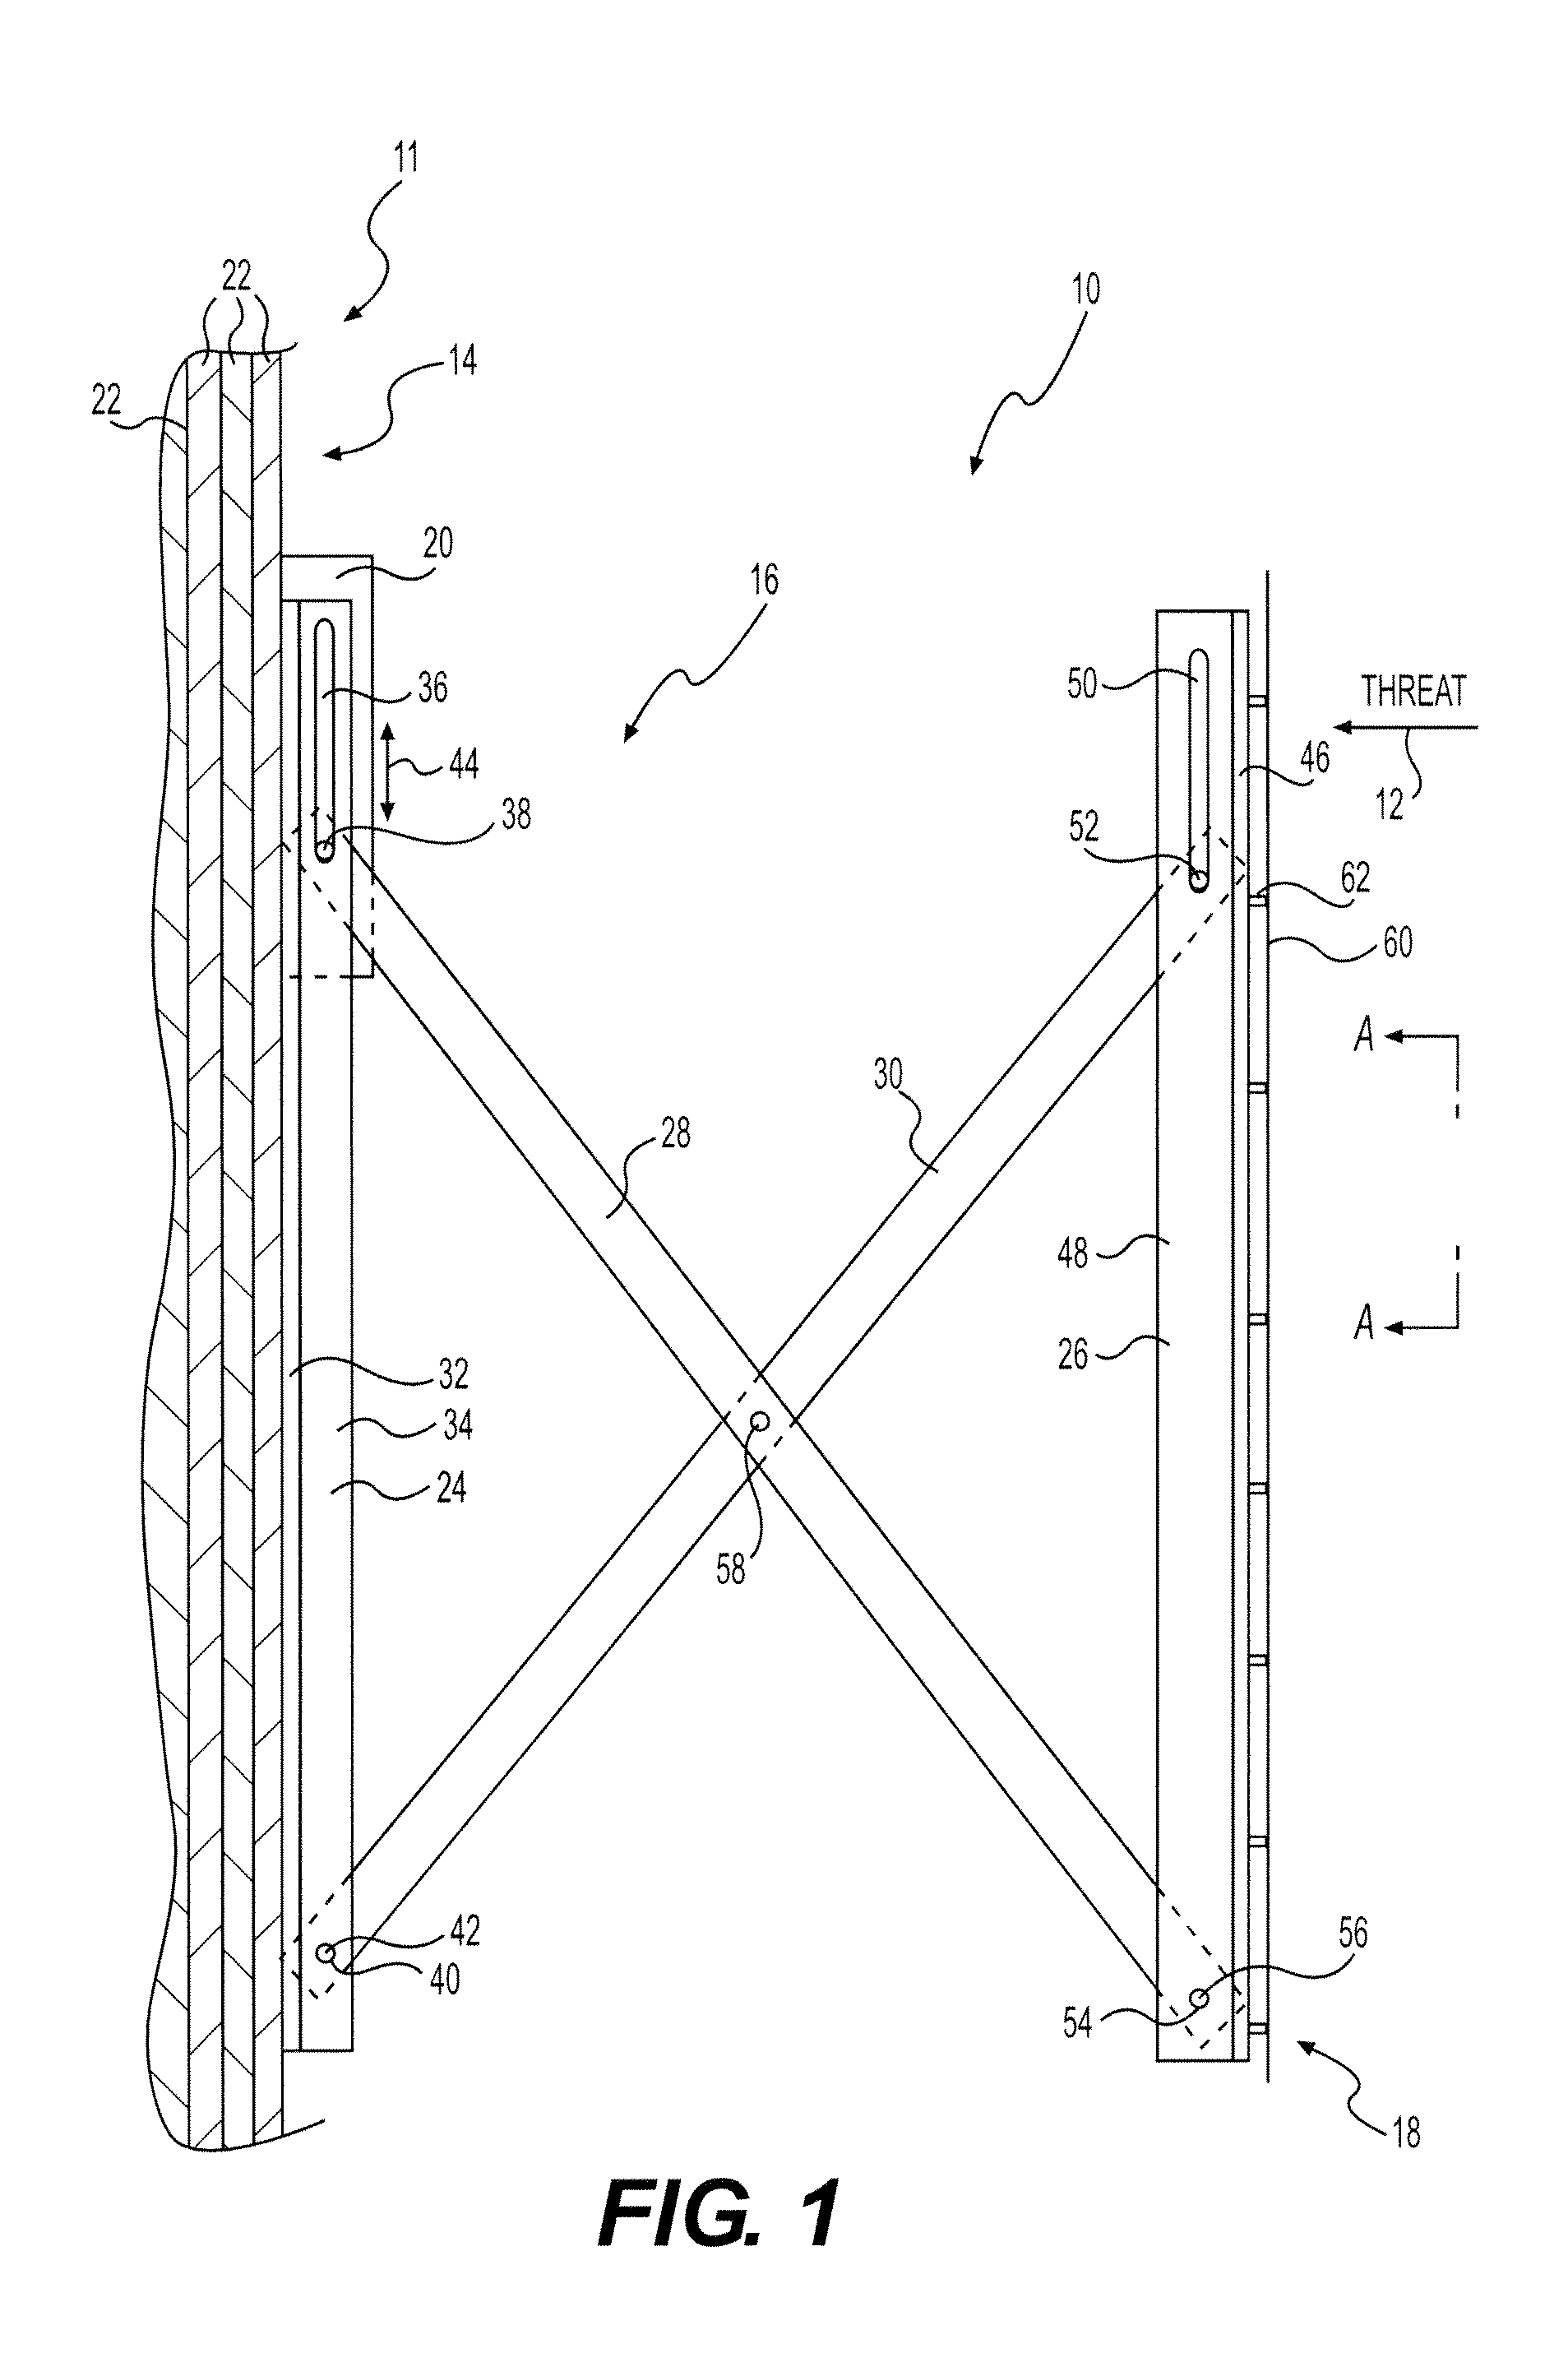 Apparatus for extending and retracting an armor system for defeating high energy projectiles